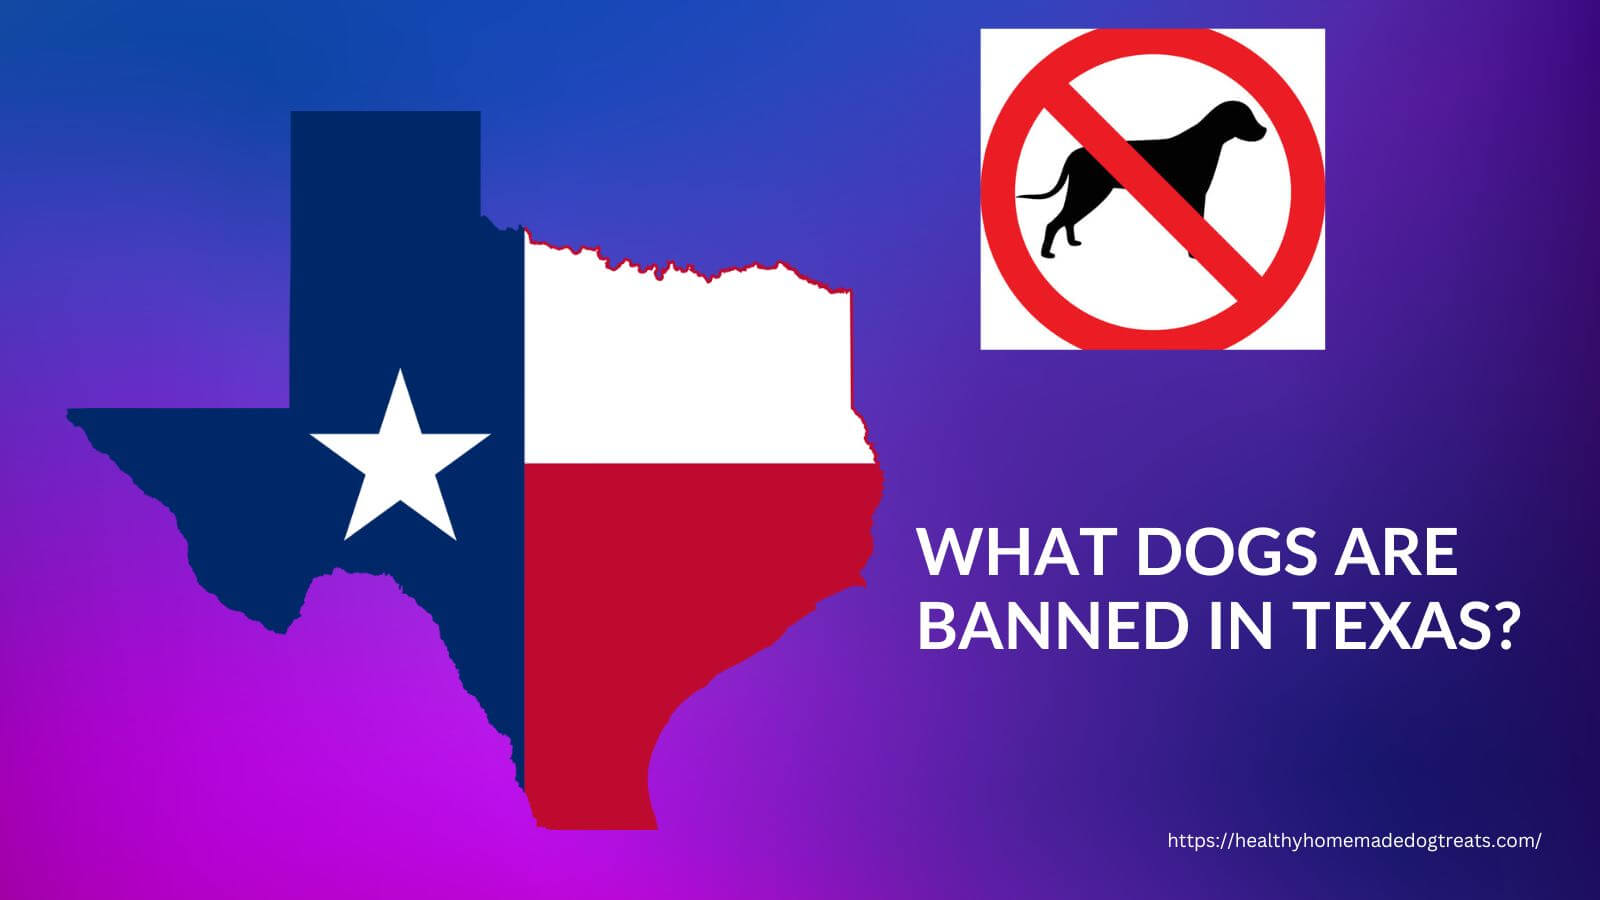 What Dogs Are Banned In Texas?